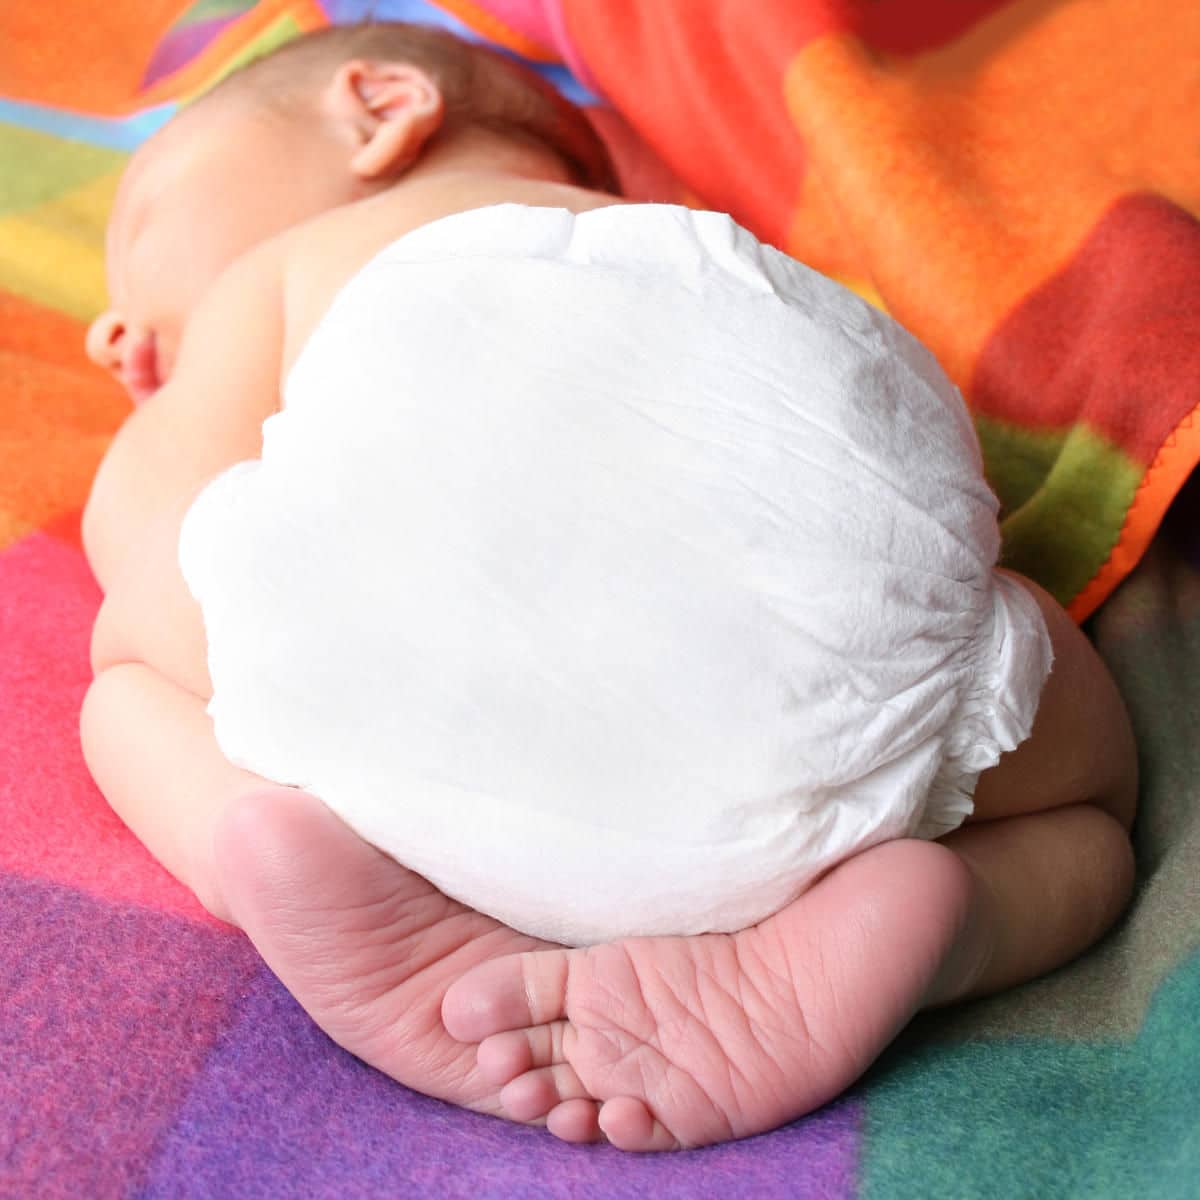 New Diaper Program Helps All Families Afford This Baby Essential